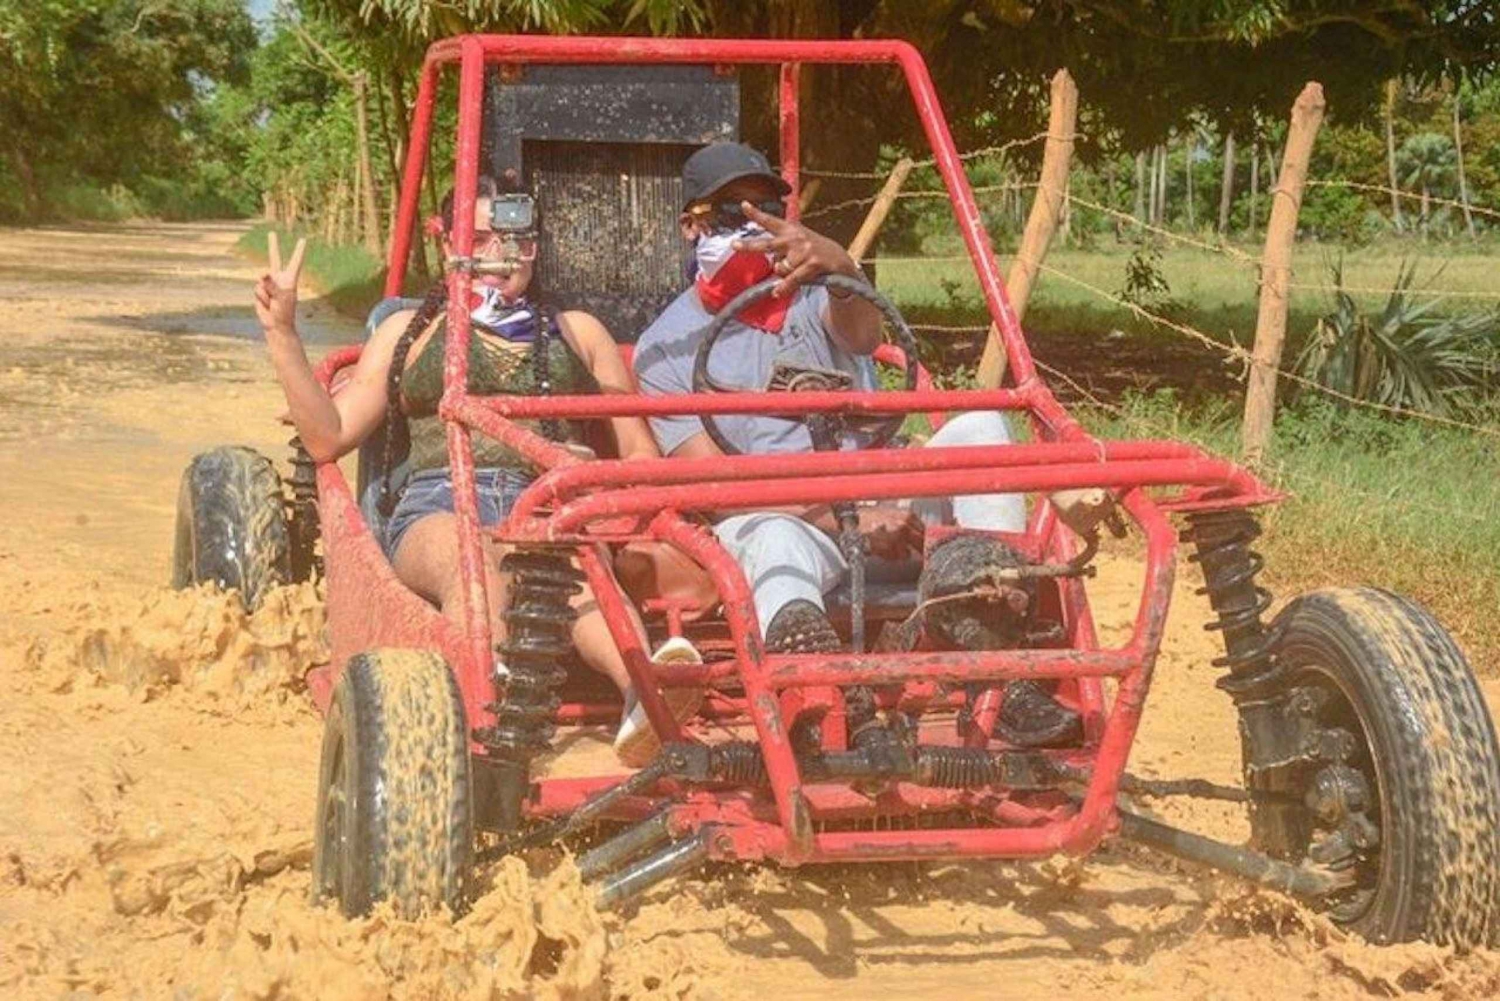 Buggy Tour Excursion in Taino Bay and Amber Cove Port